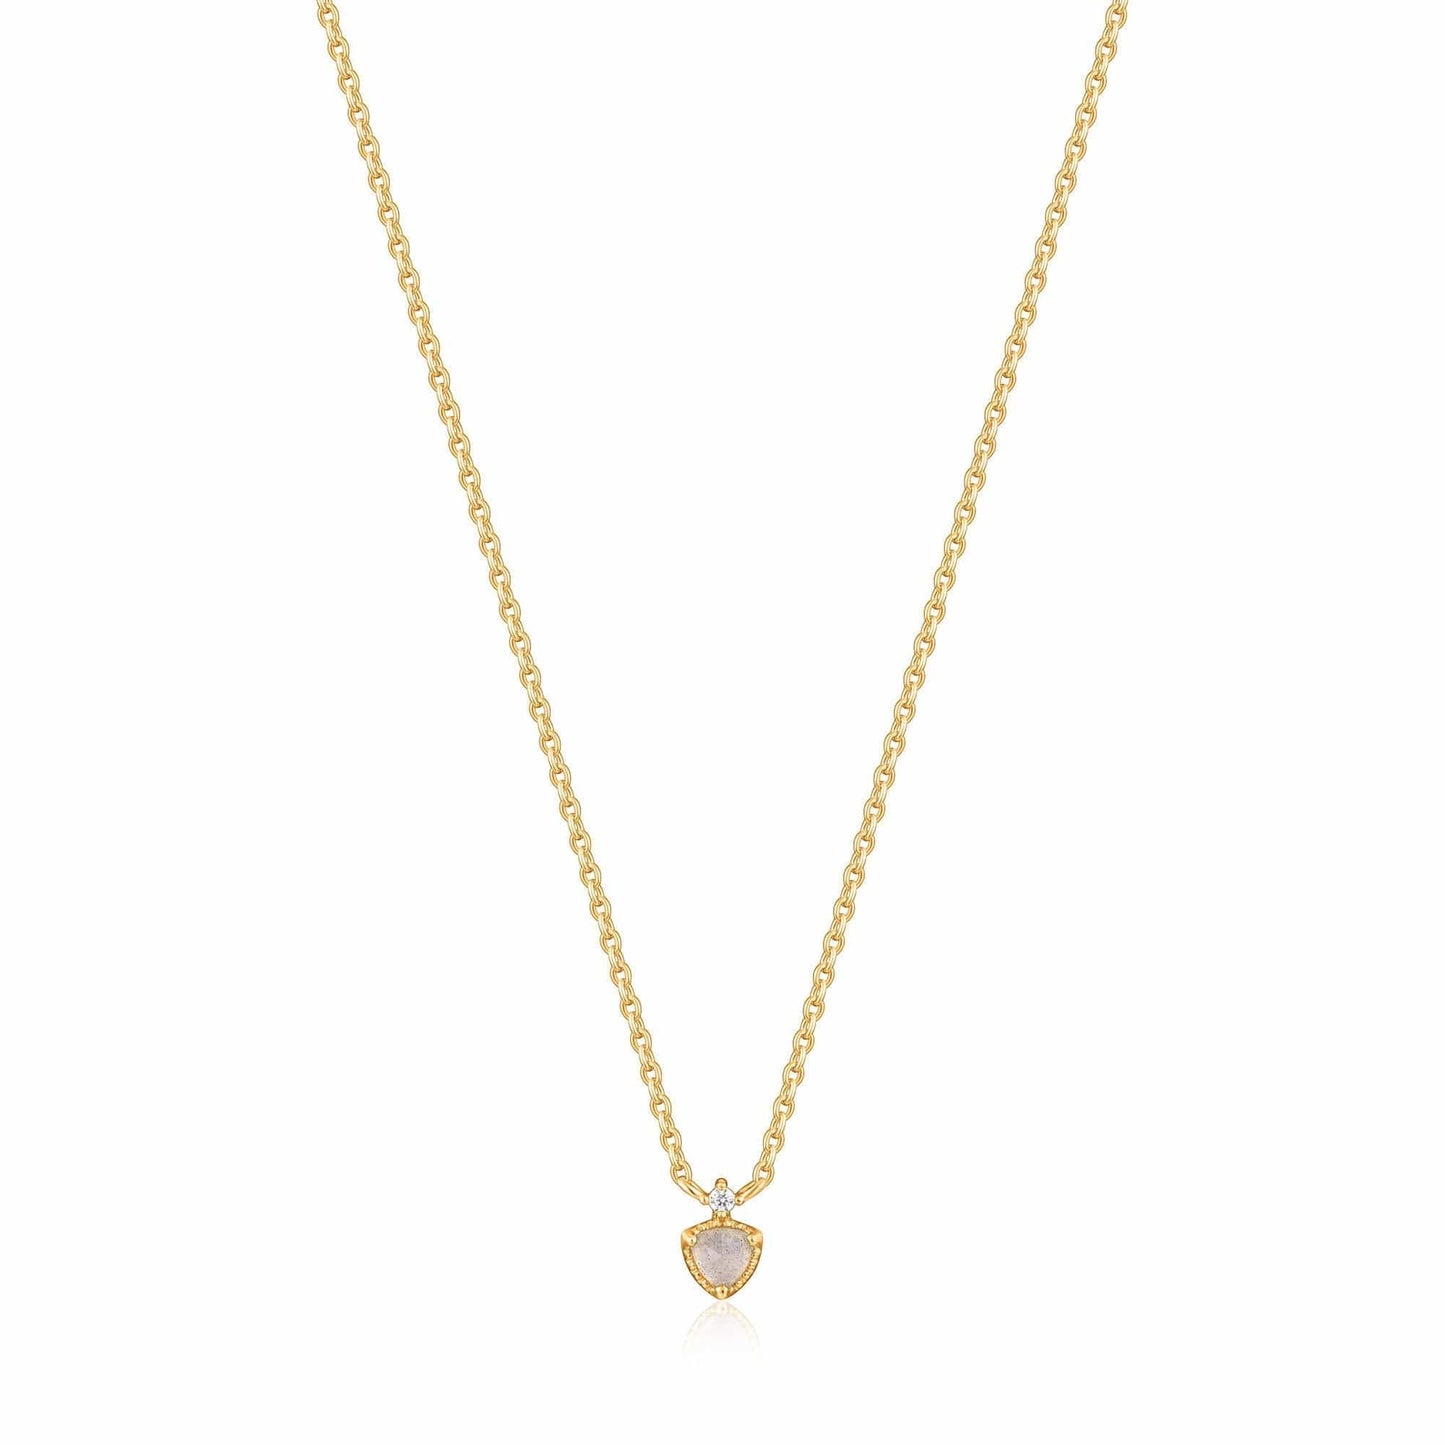 NKL-GPL Gold Midnight Necklace